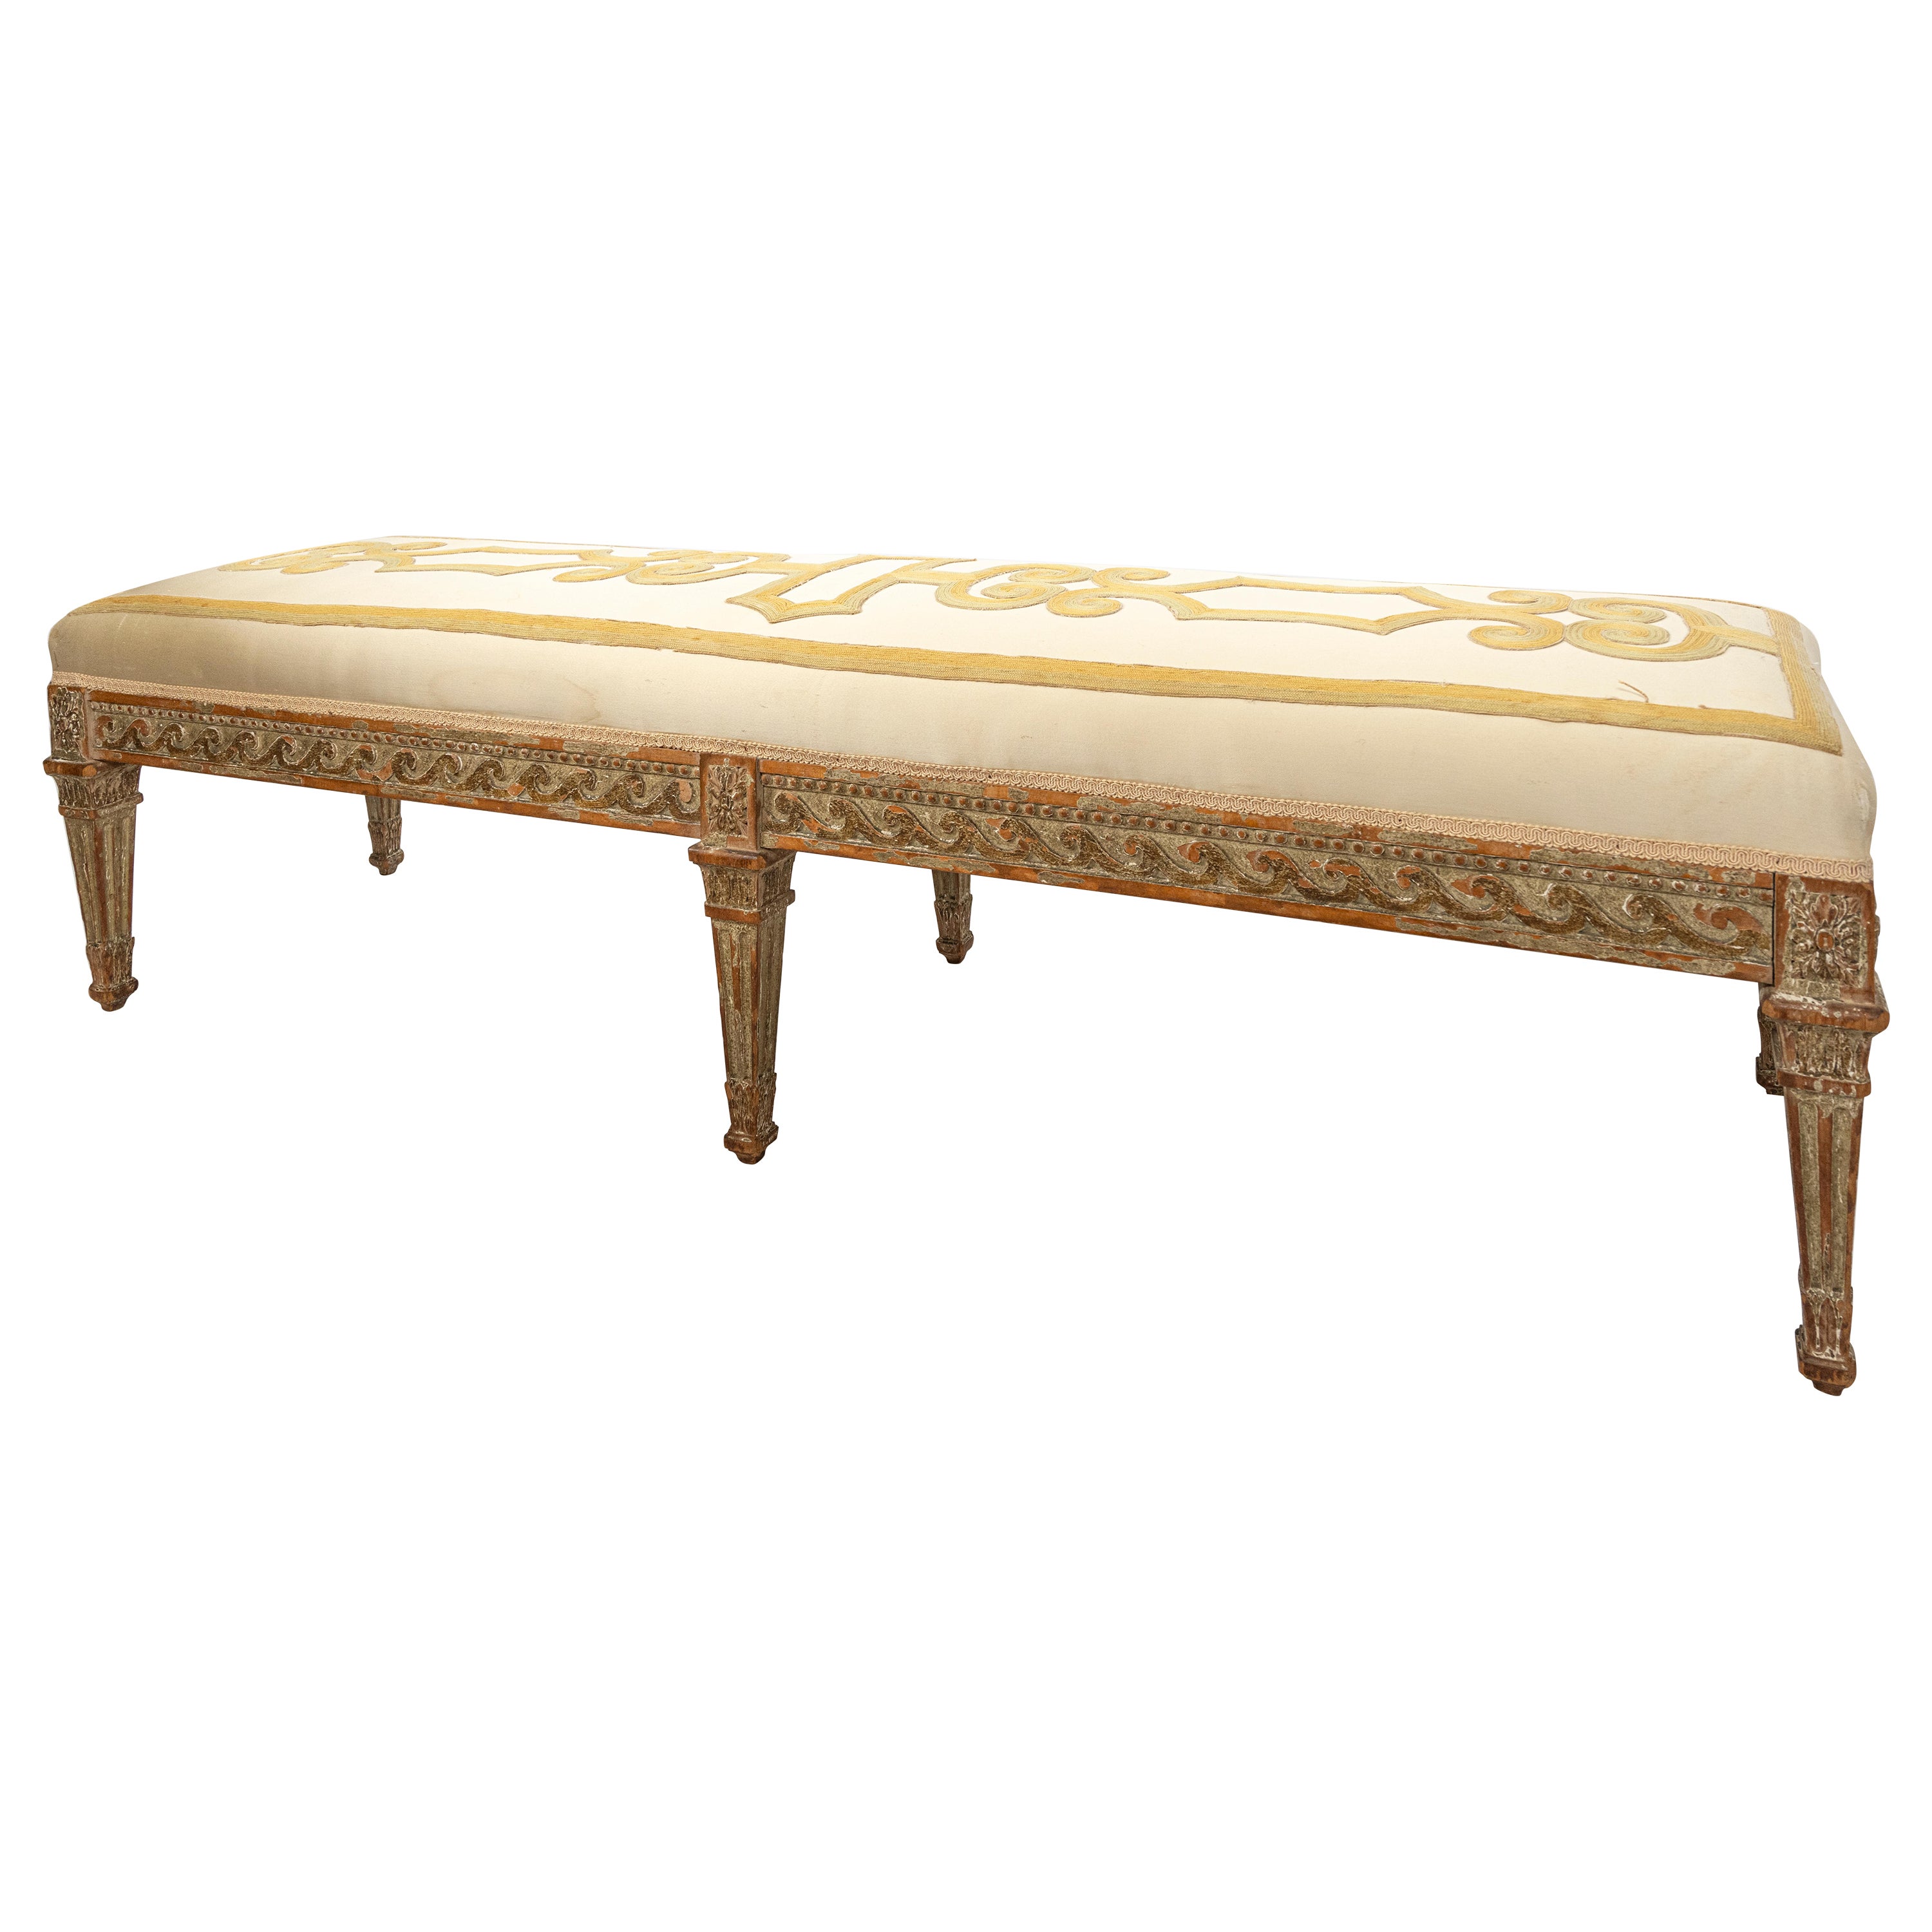 Italian Neoclassical-Style Painted Wood Bench